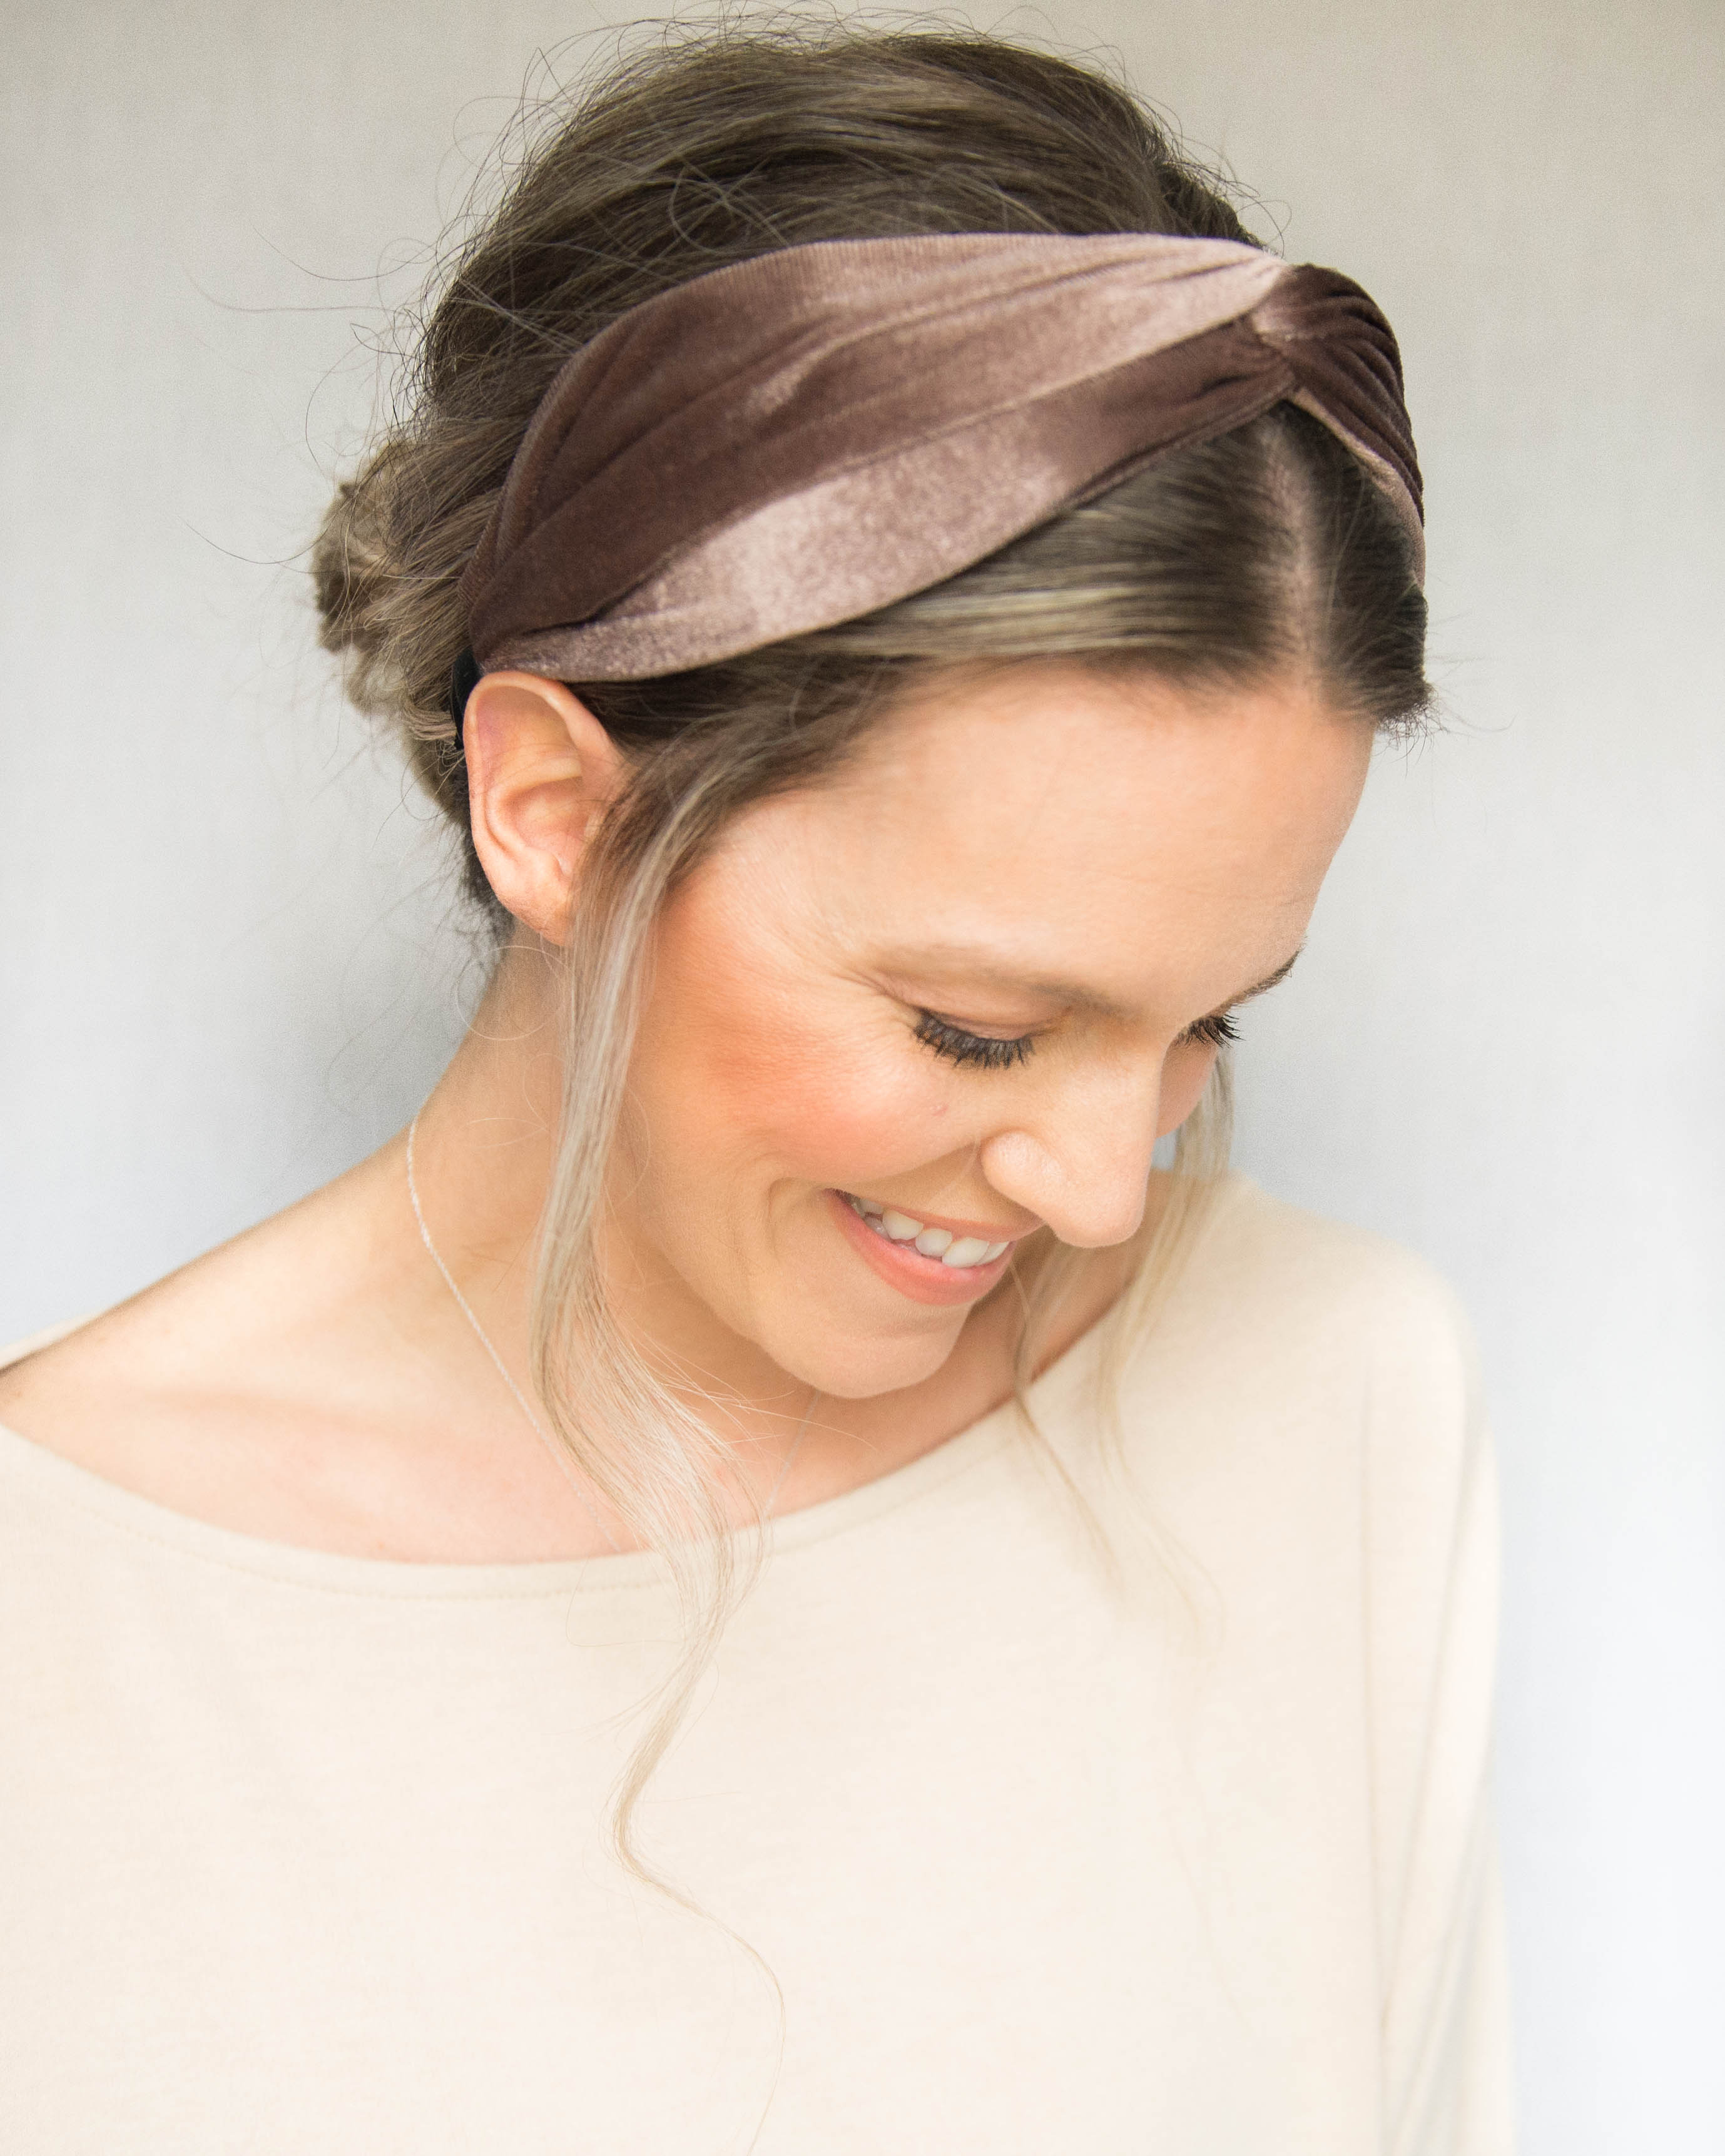 How To Wear A Headband: Effortless Hairstyles For Everyday   Fashion Blog